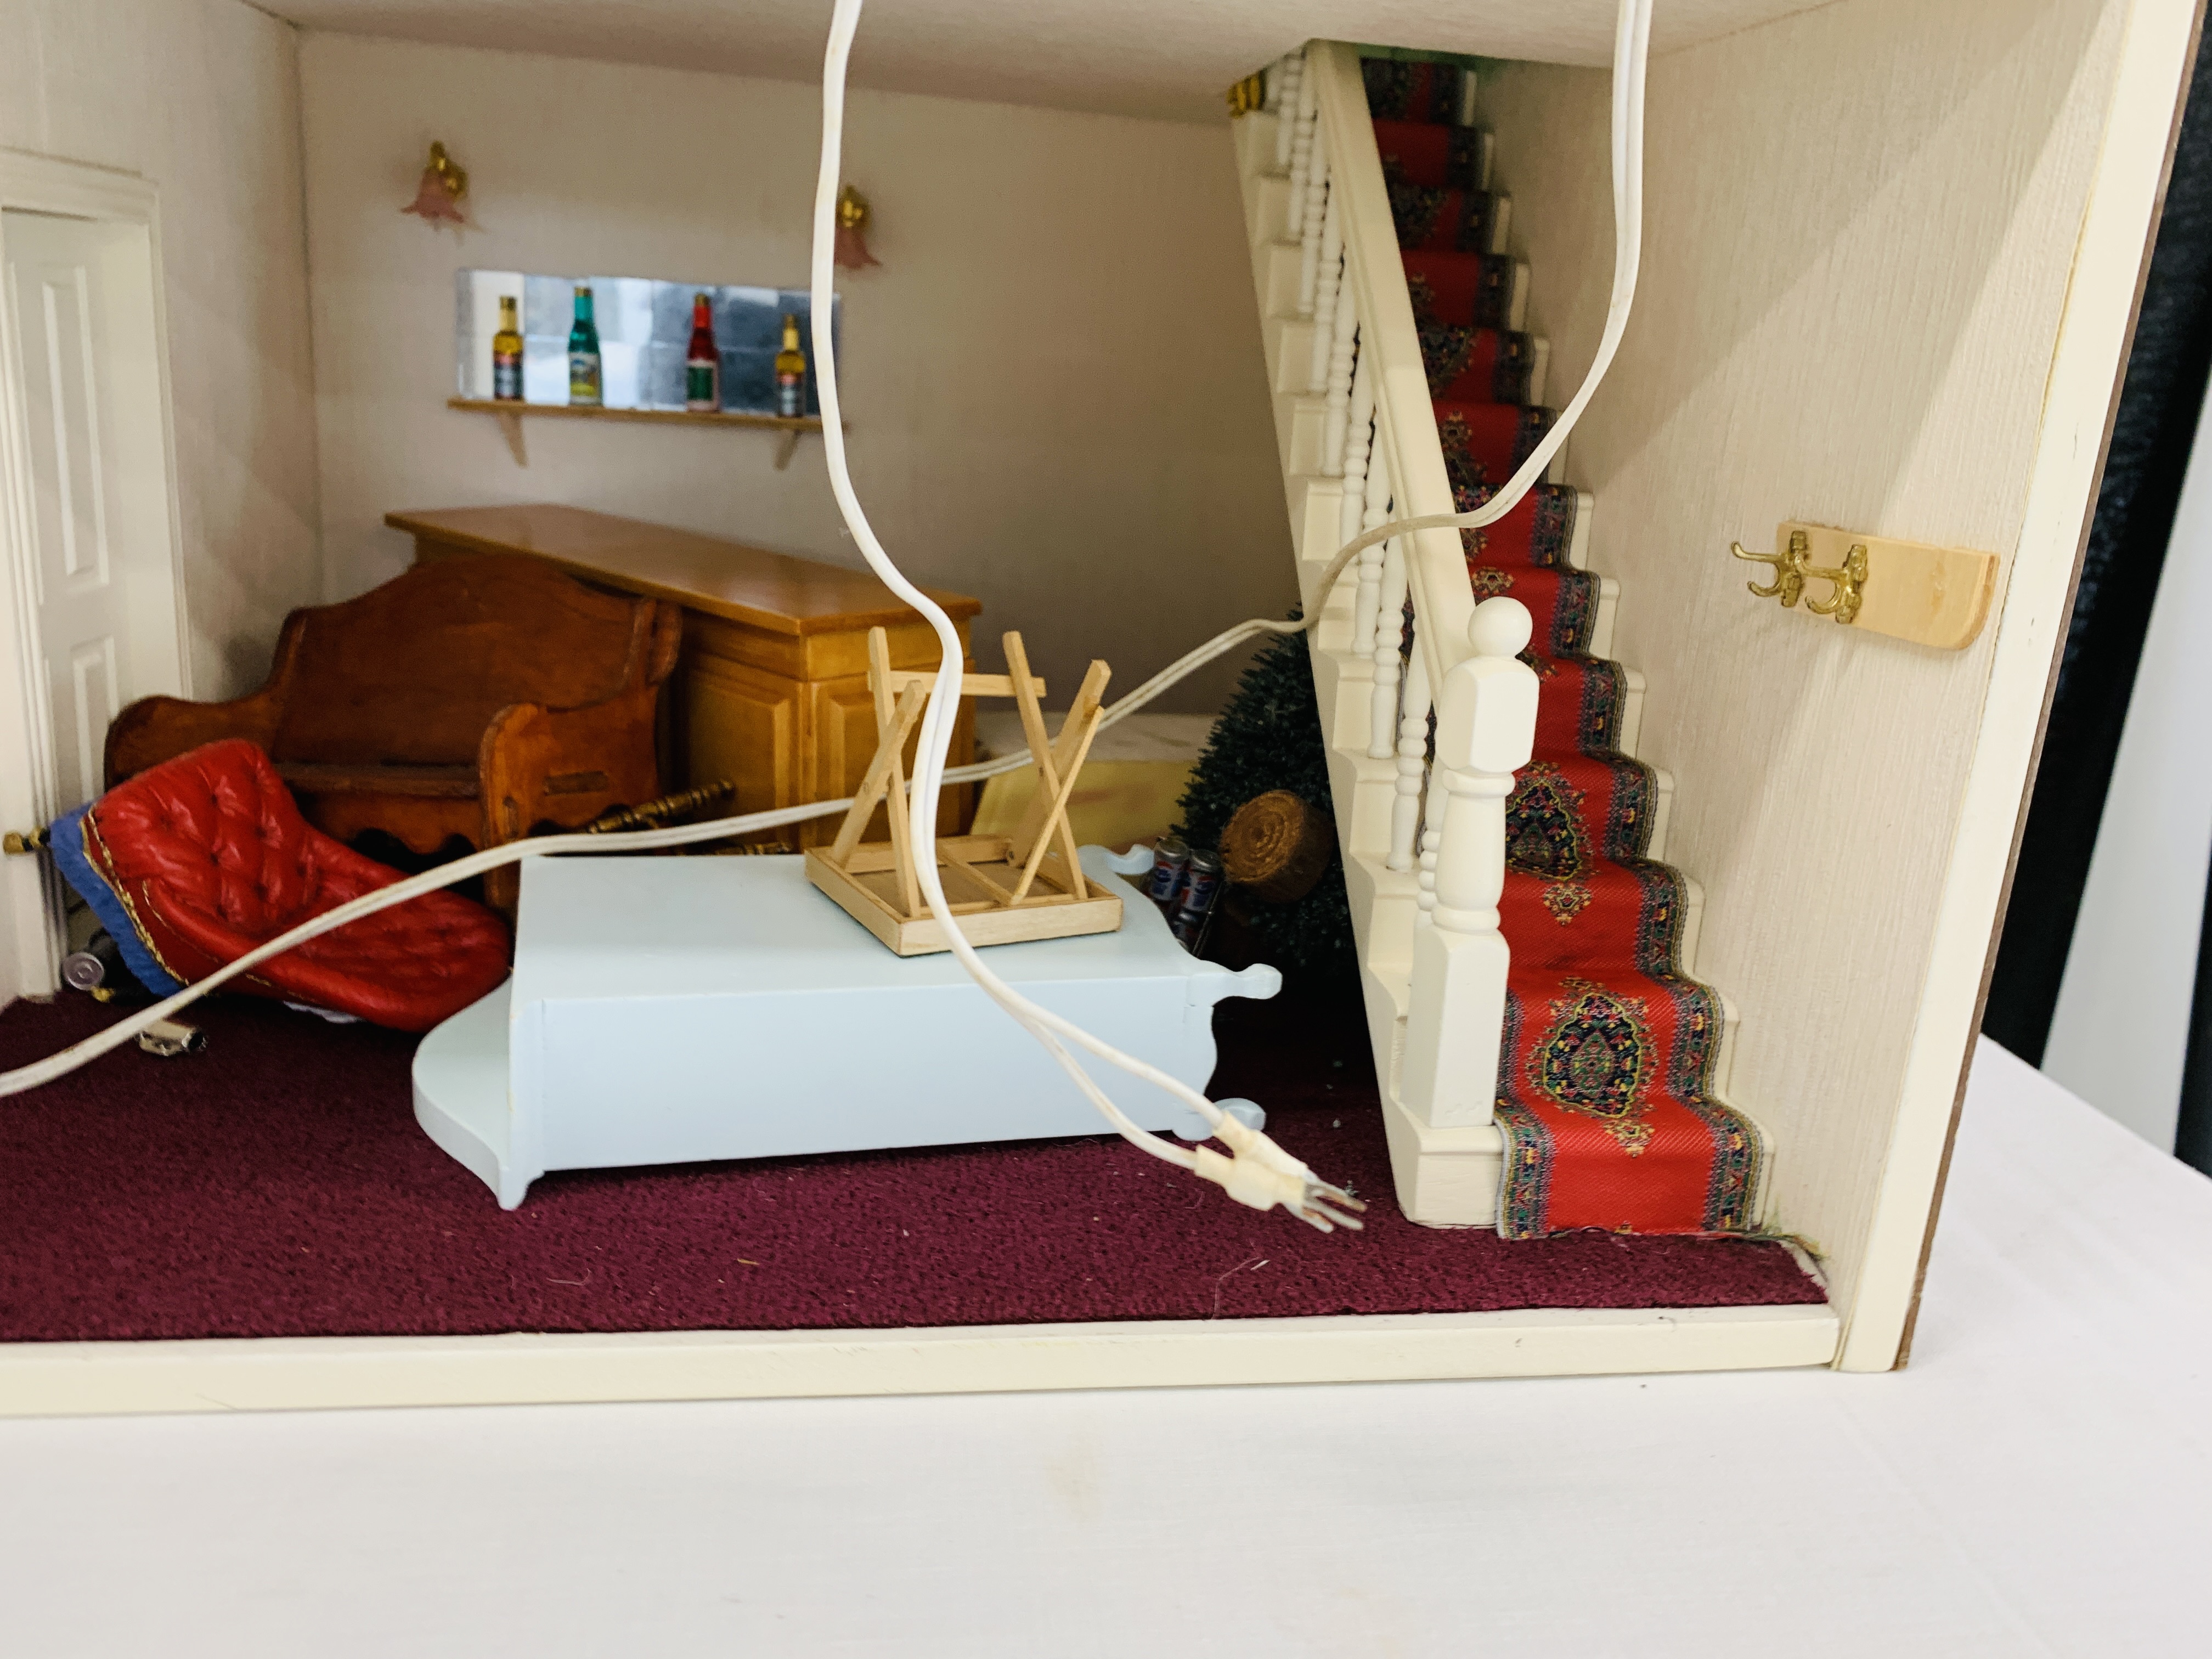 THREE STOREY DOLLS HOUSE ALONG WITH VARIOUS MINIATURE DOLLS HOUSE FURNITURE H 69CM, W 59CM, D 42CM. - Image 11 of 12